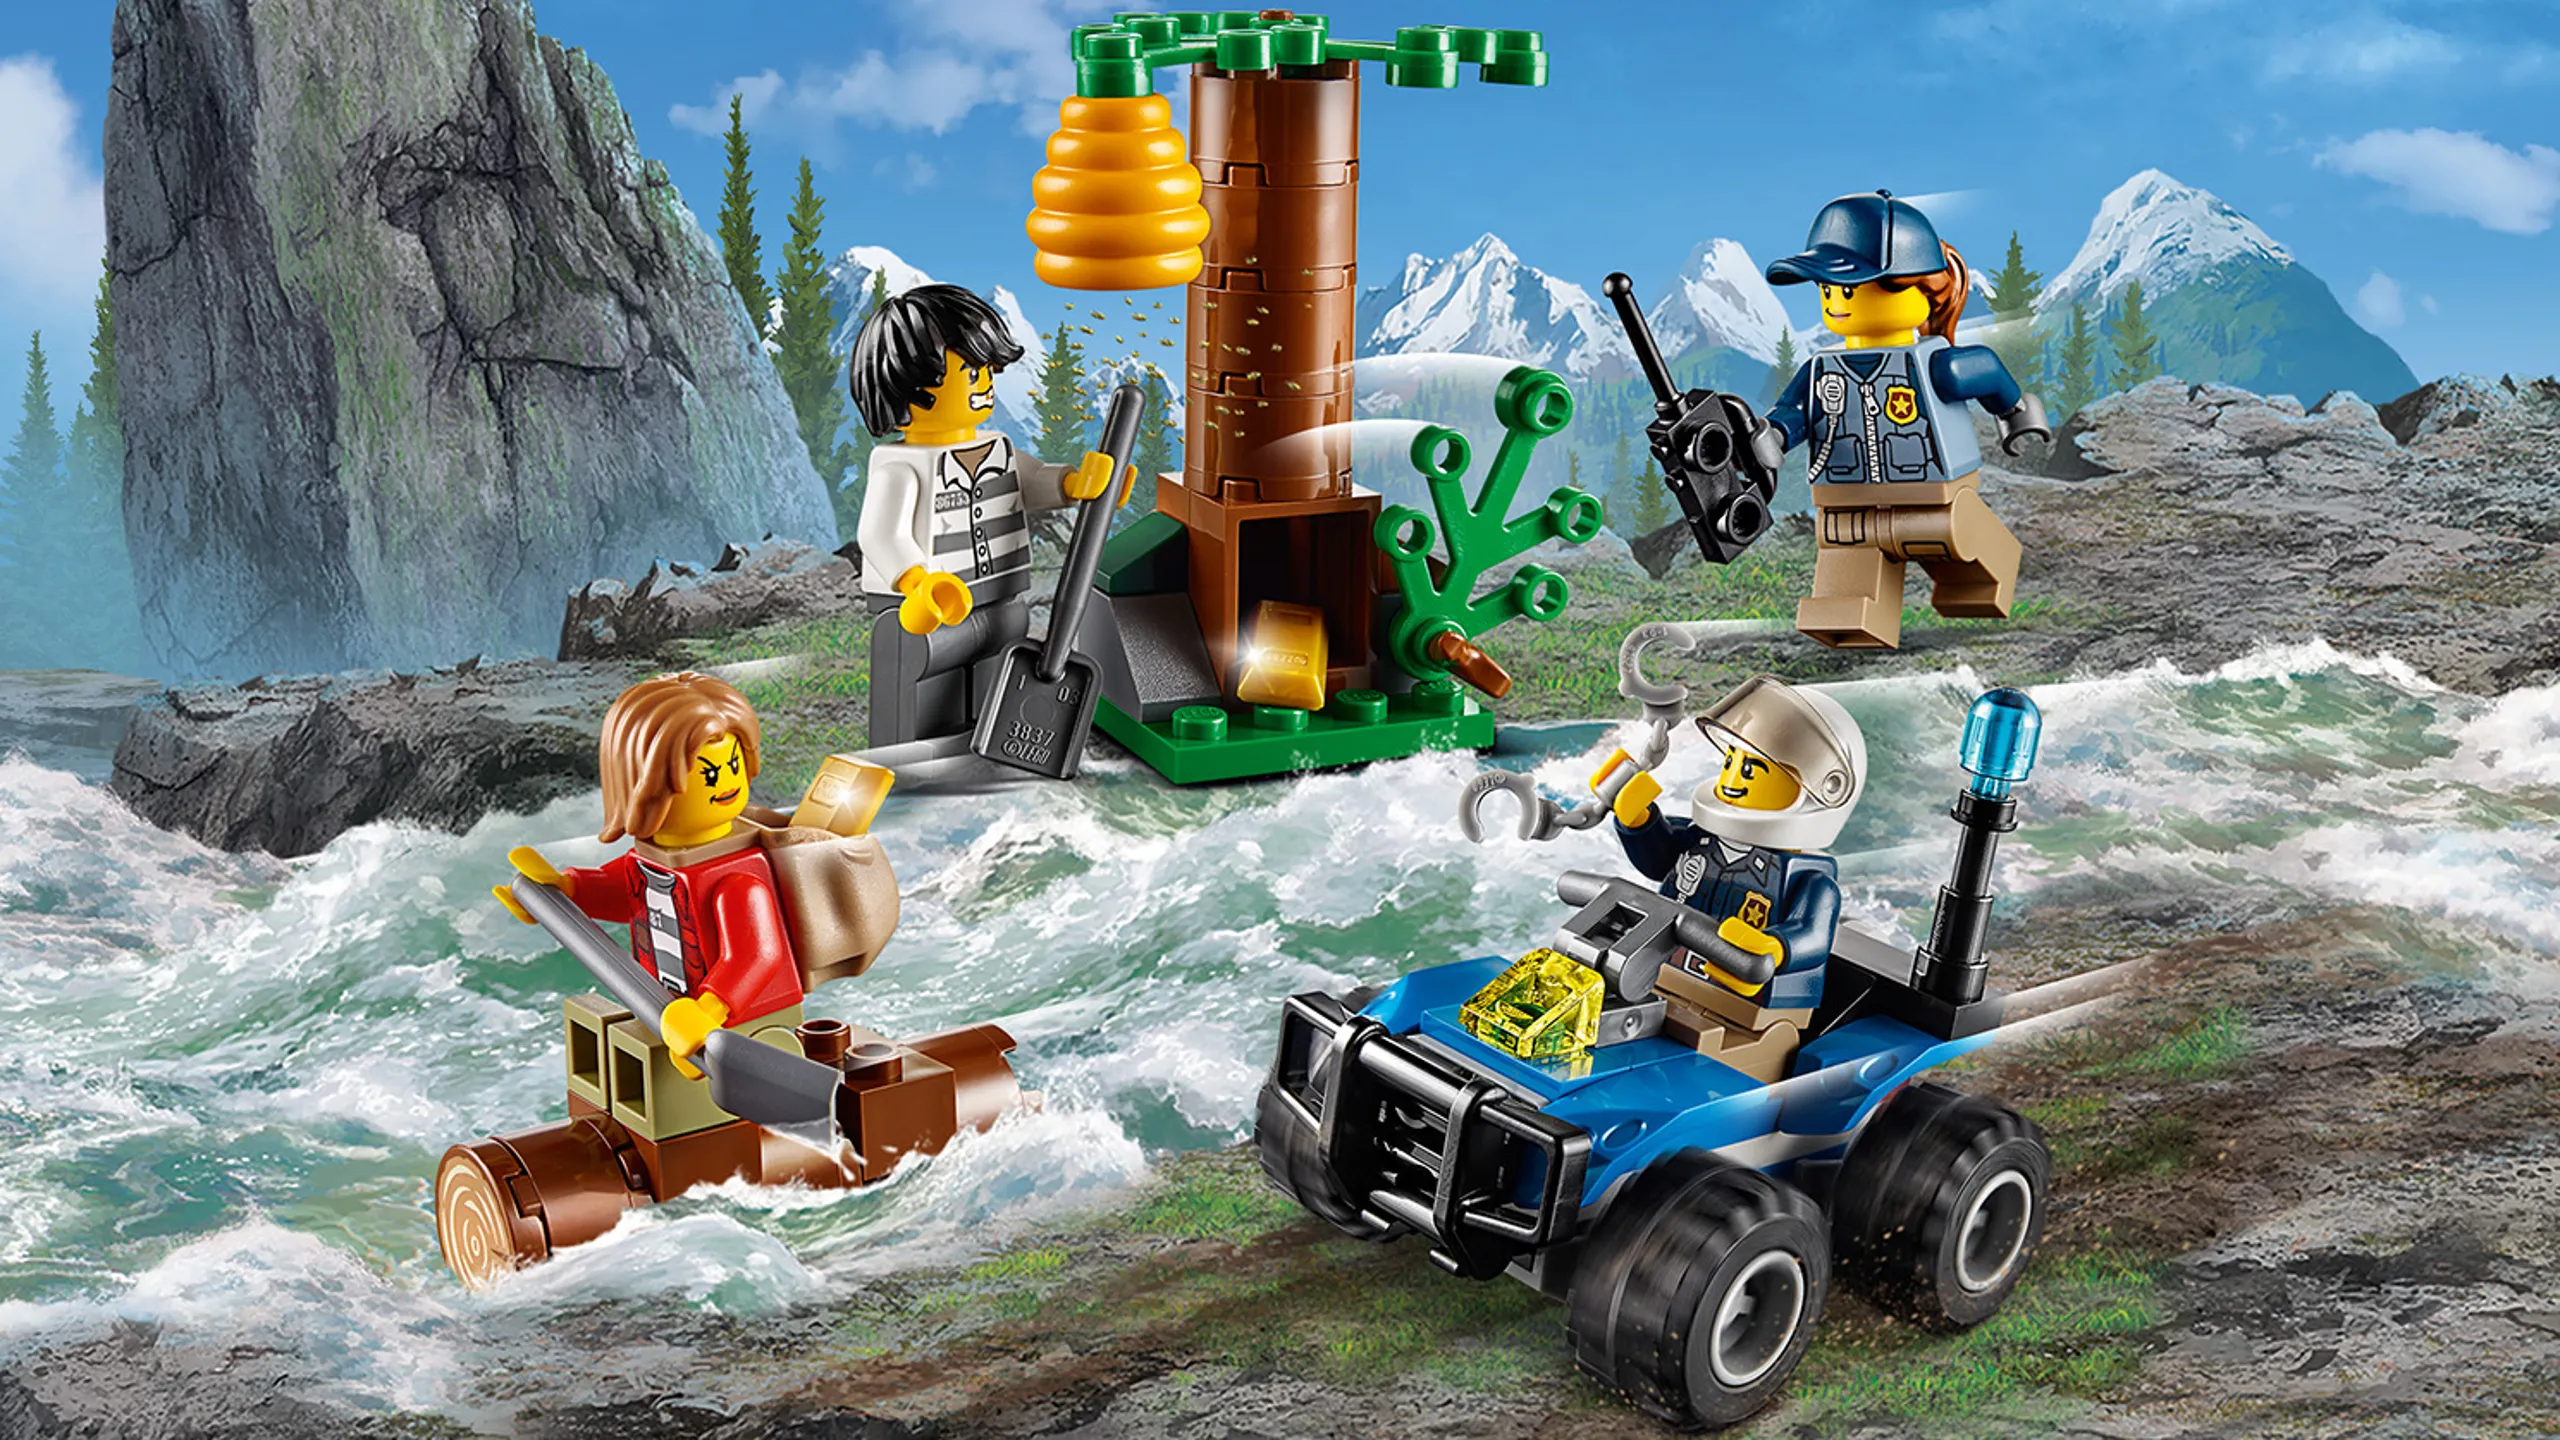 LEGO City Mountain Police - 60171 Mountain Fugitives - The mountain police chases the fugitives that try to escape with the help of a rocky terrain, a wild river and an active beehive.